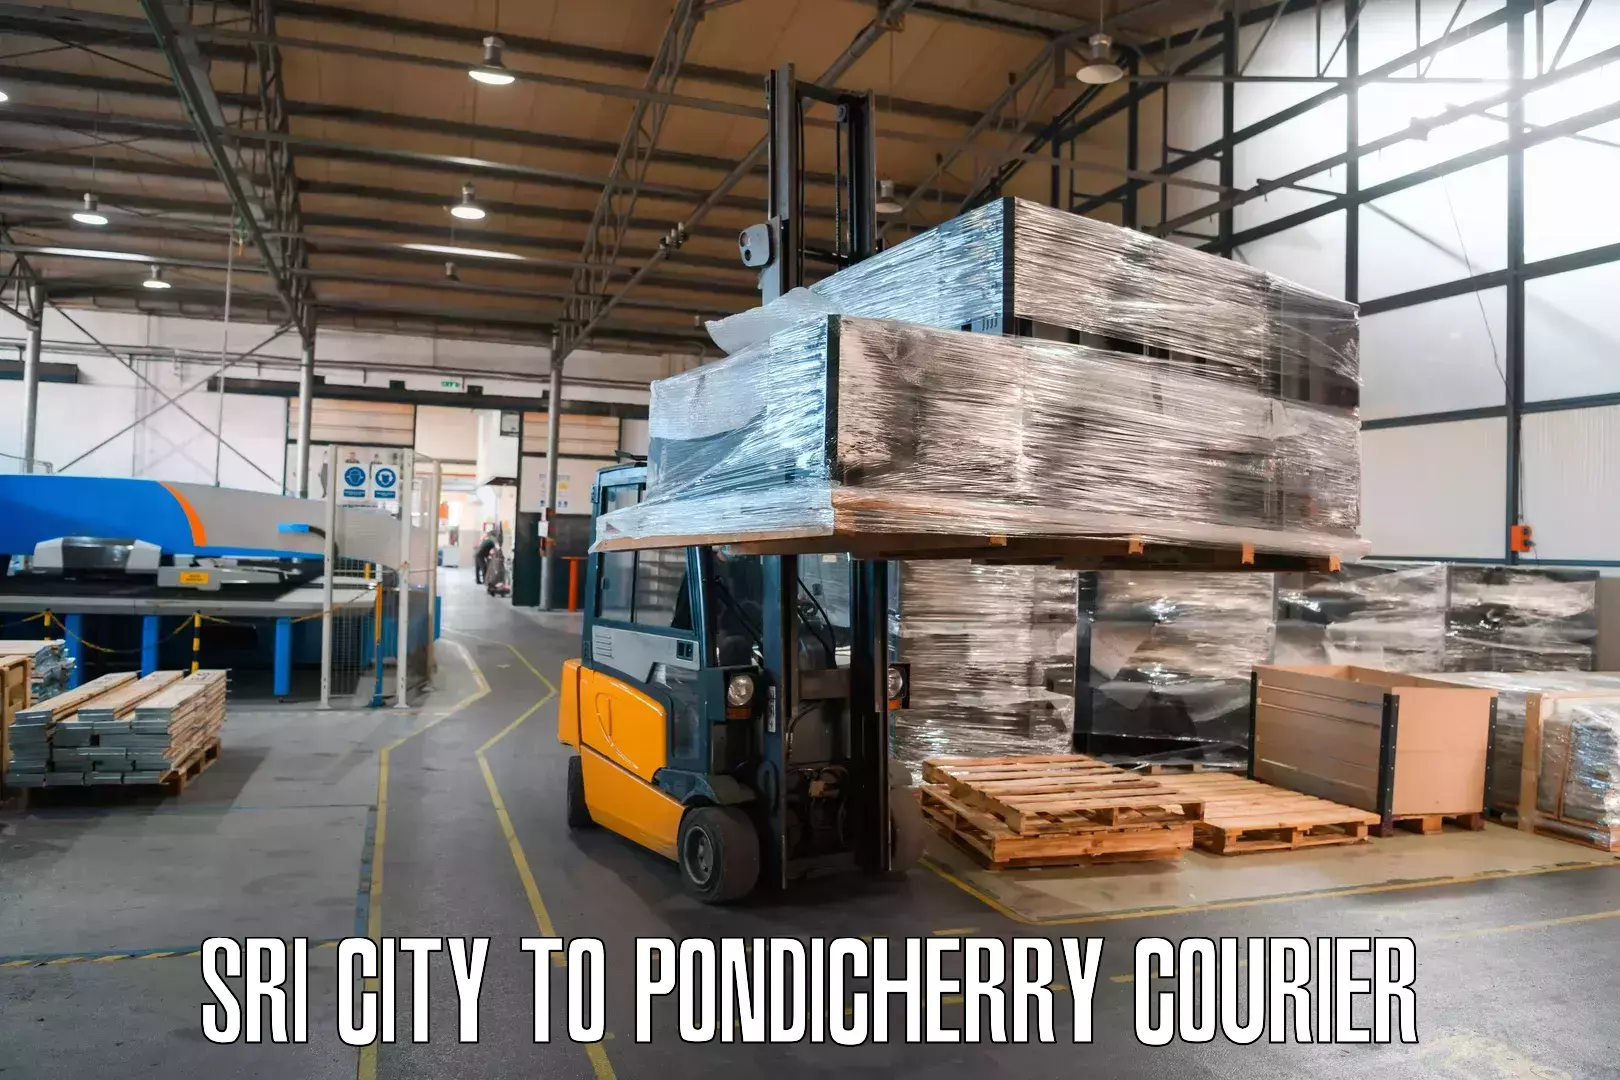 Express shipping in Sri City to Pondicherry